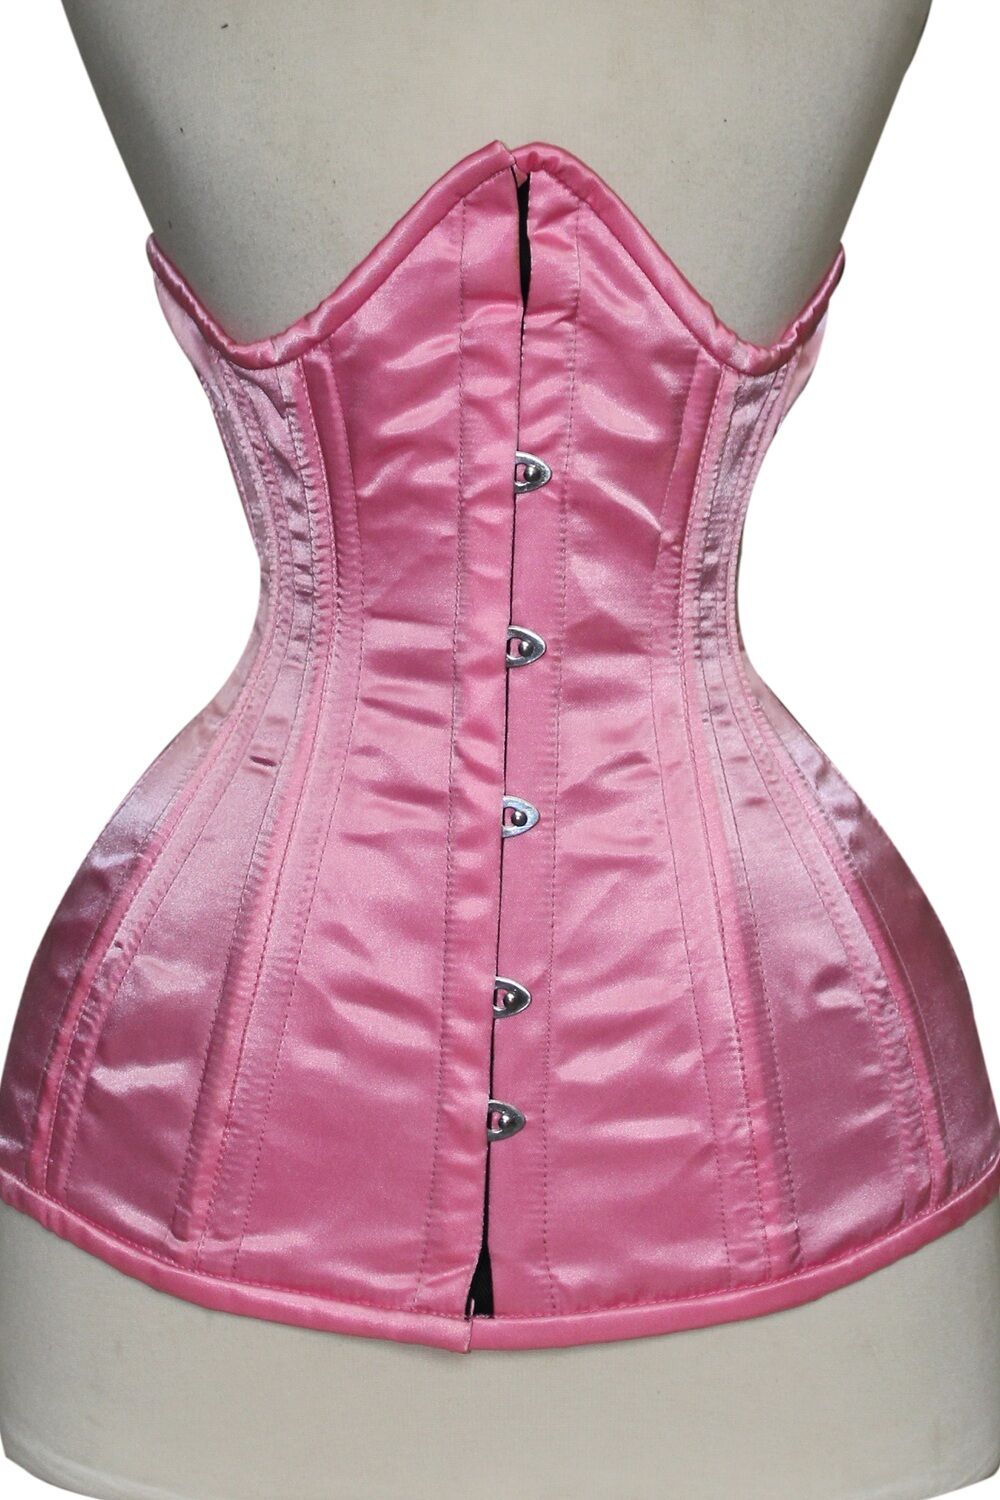 Top Quality steel boned Waist training softsatin corset in 20 colors